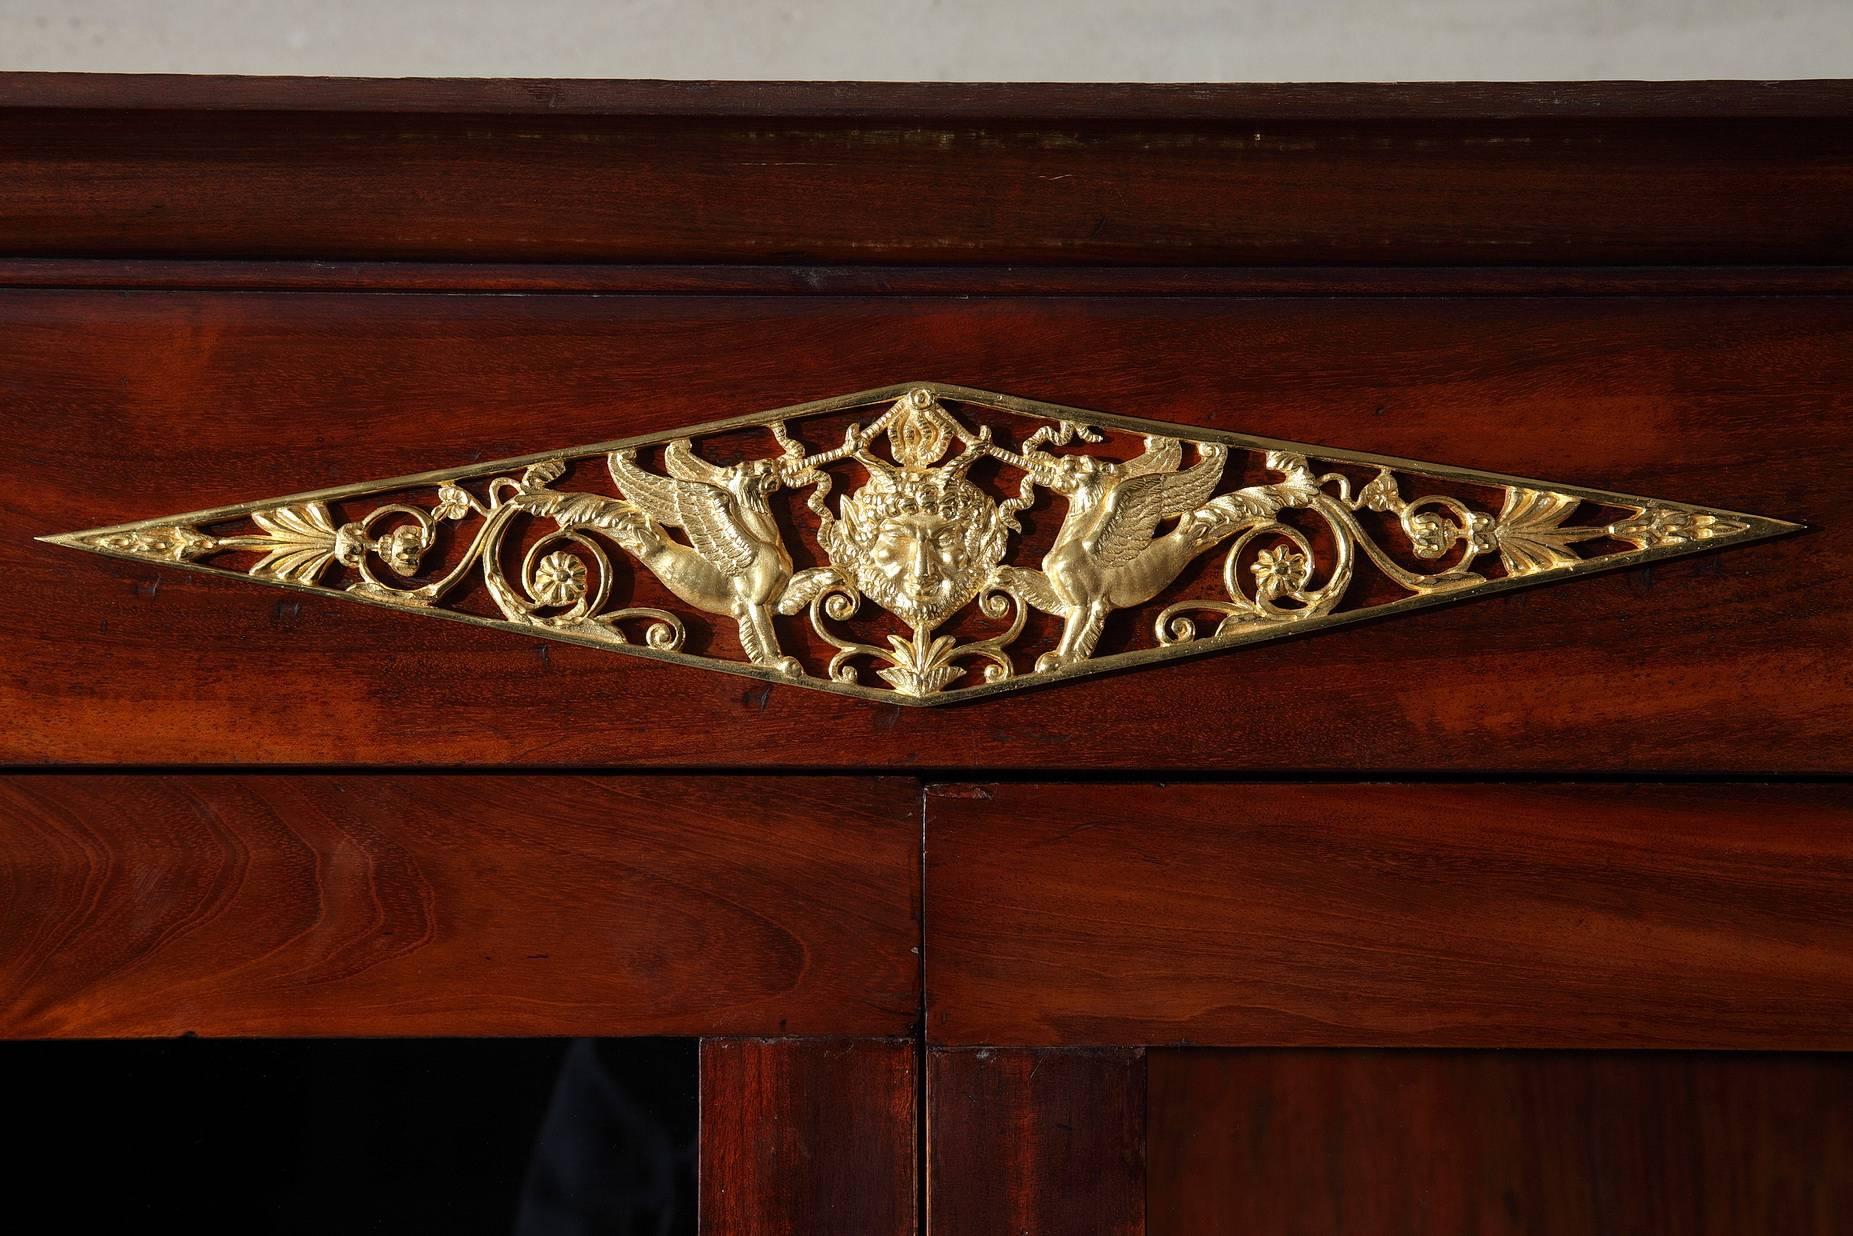 Large mahogany and mahogany veneer secretary desk with gilt bronze decoration. Two columns set in the front of the case are capped with rings. A gilt bronze mask crowned with vine-leaves is set above each column. The entablature is embellished with